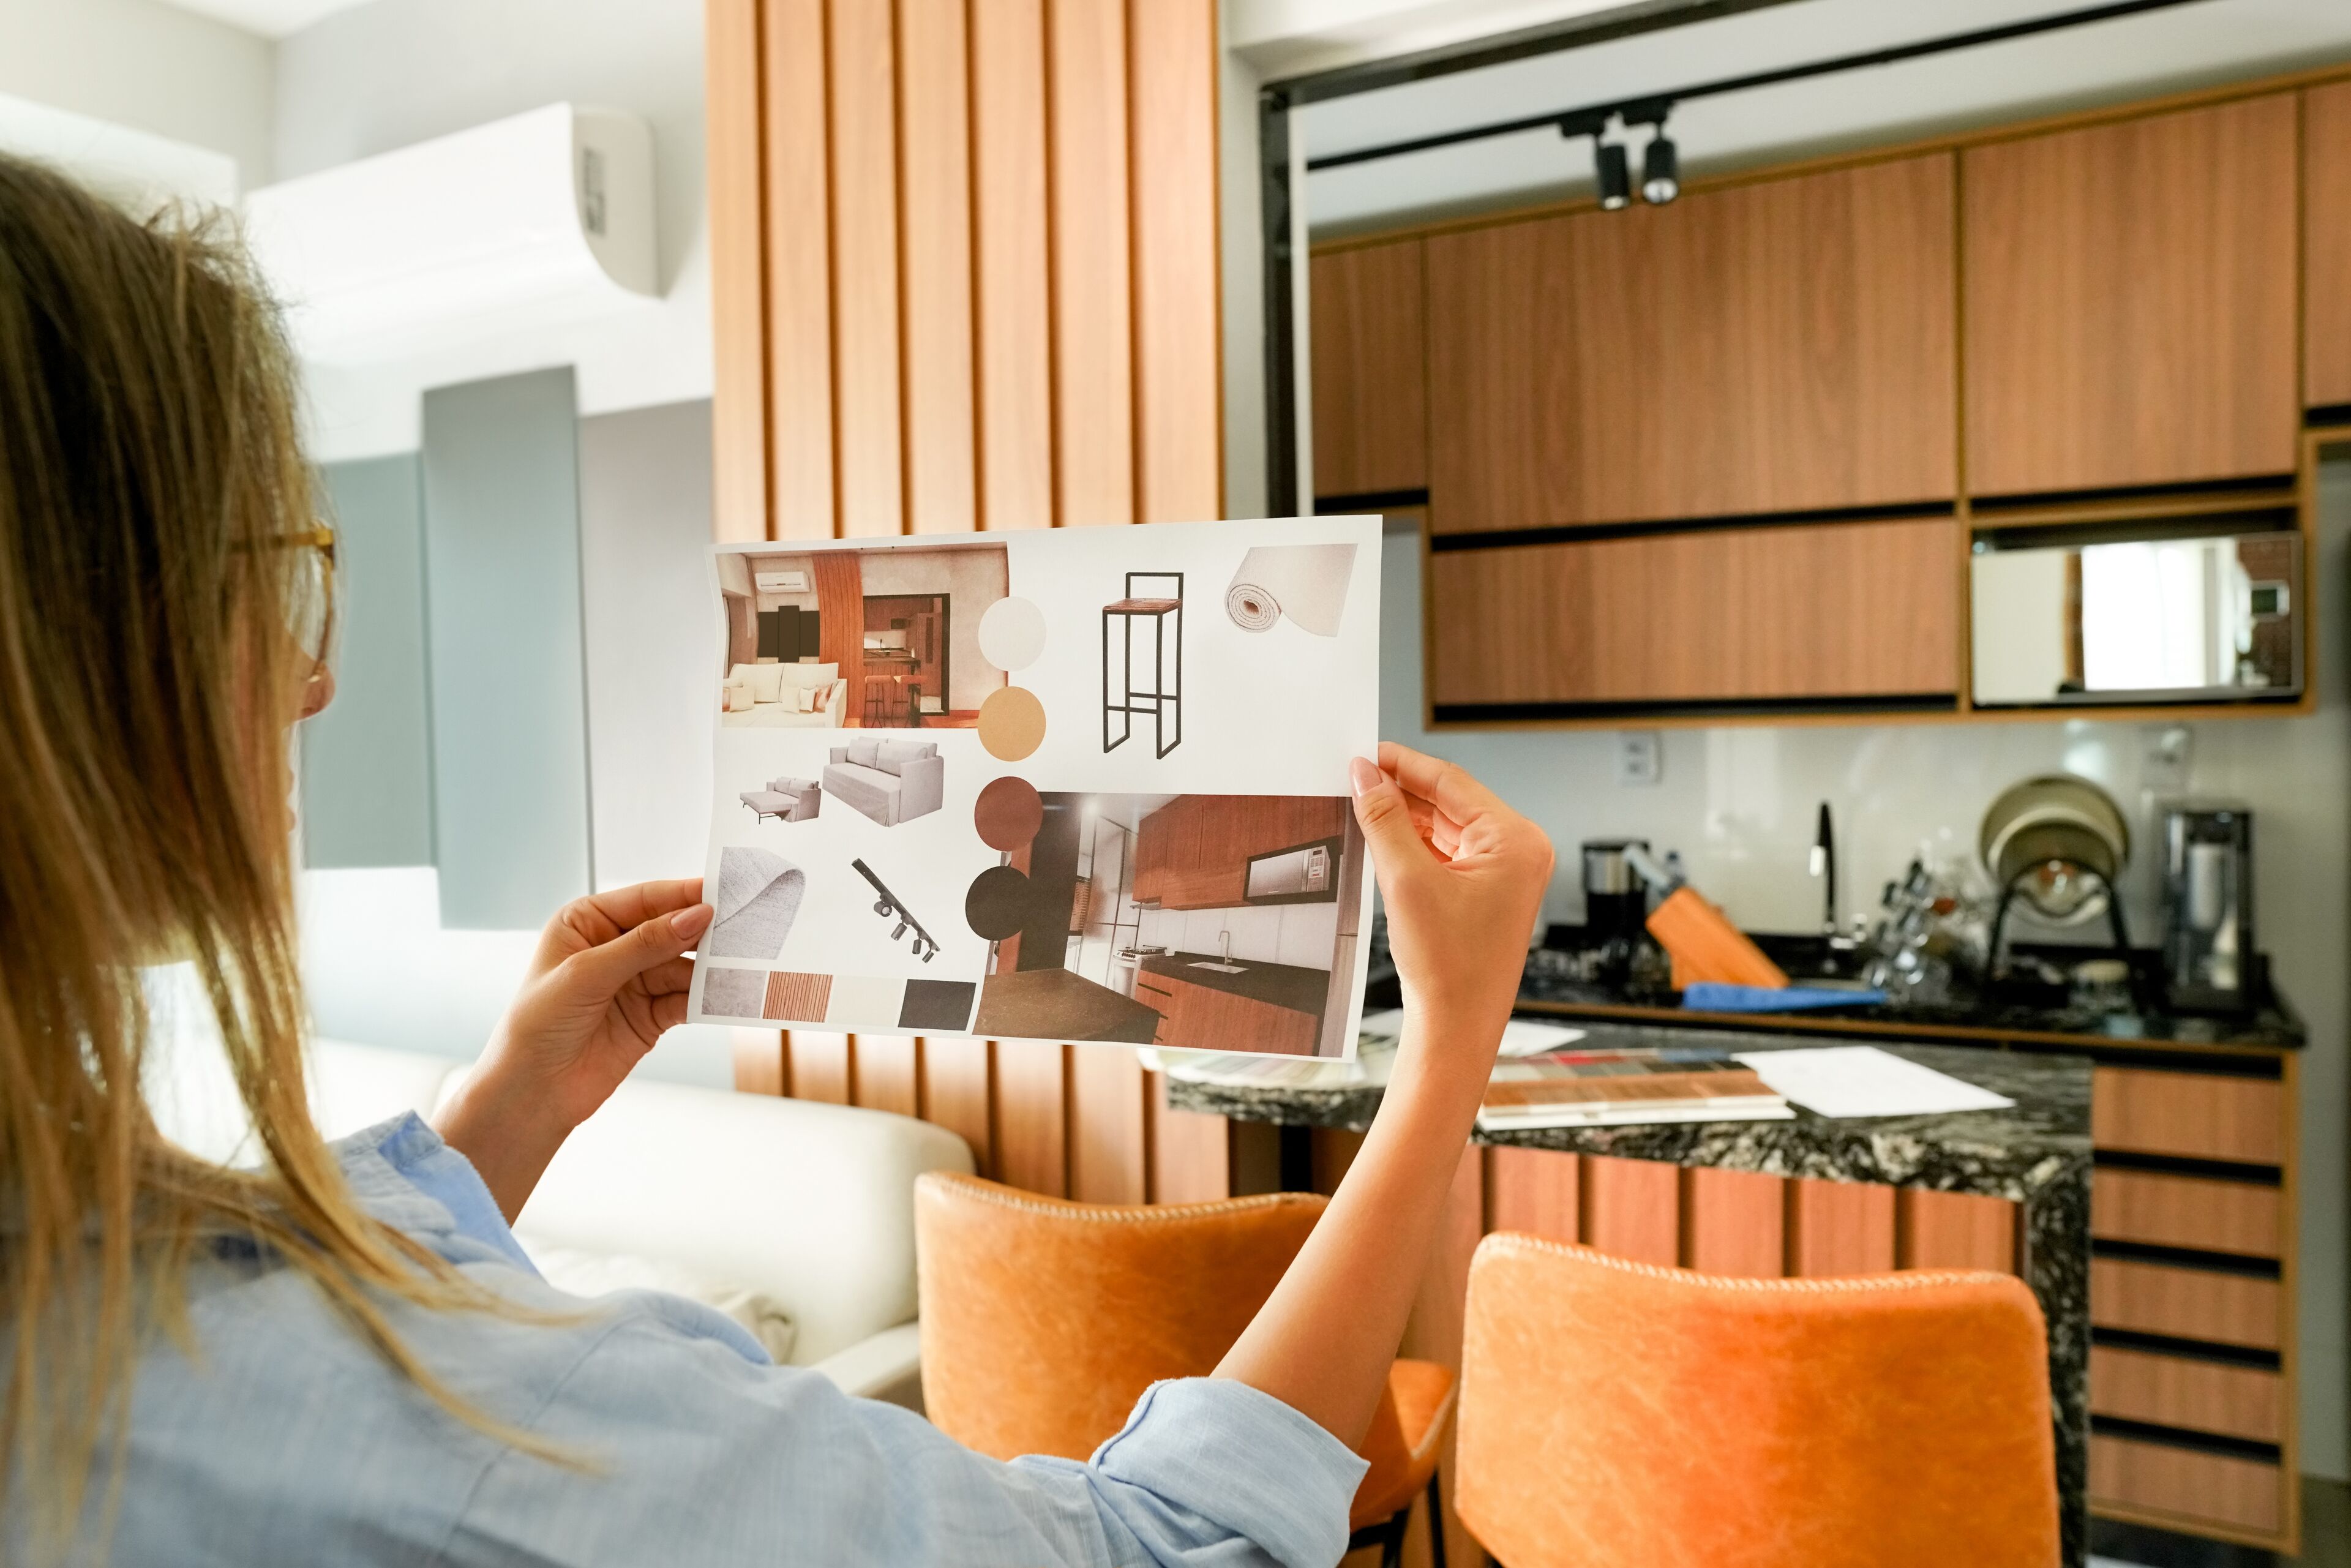 ImageA person examines a mood board containing various interior design elements for a home renovation project.